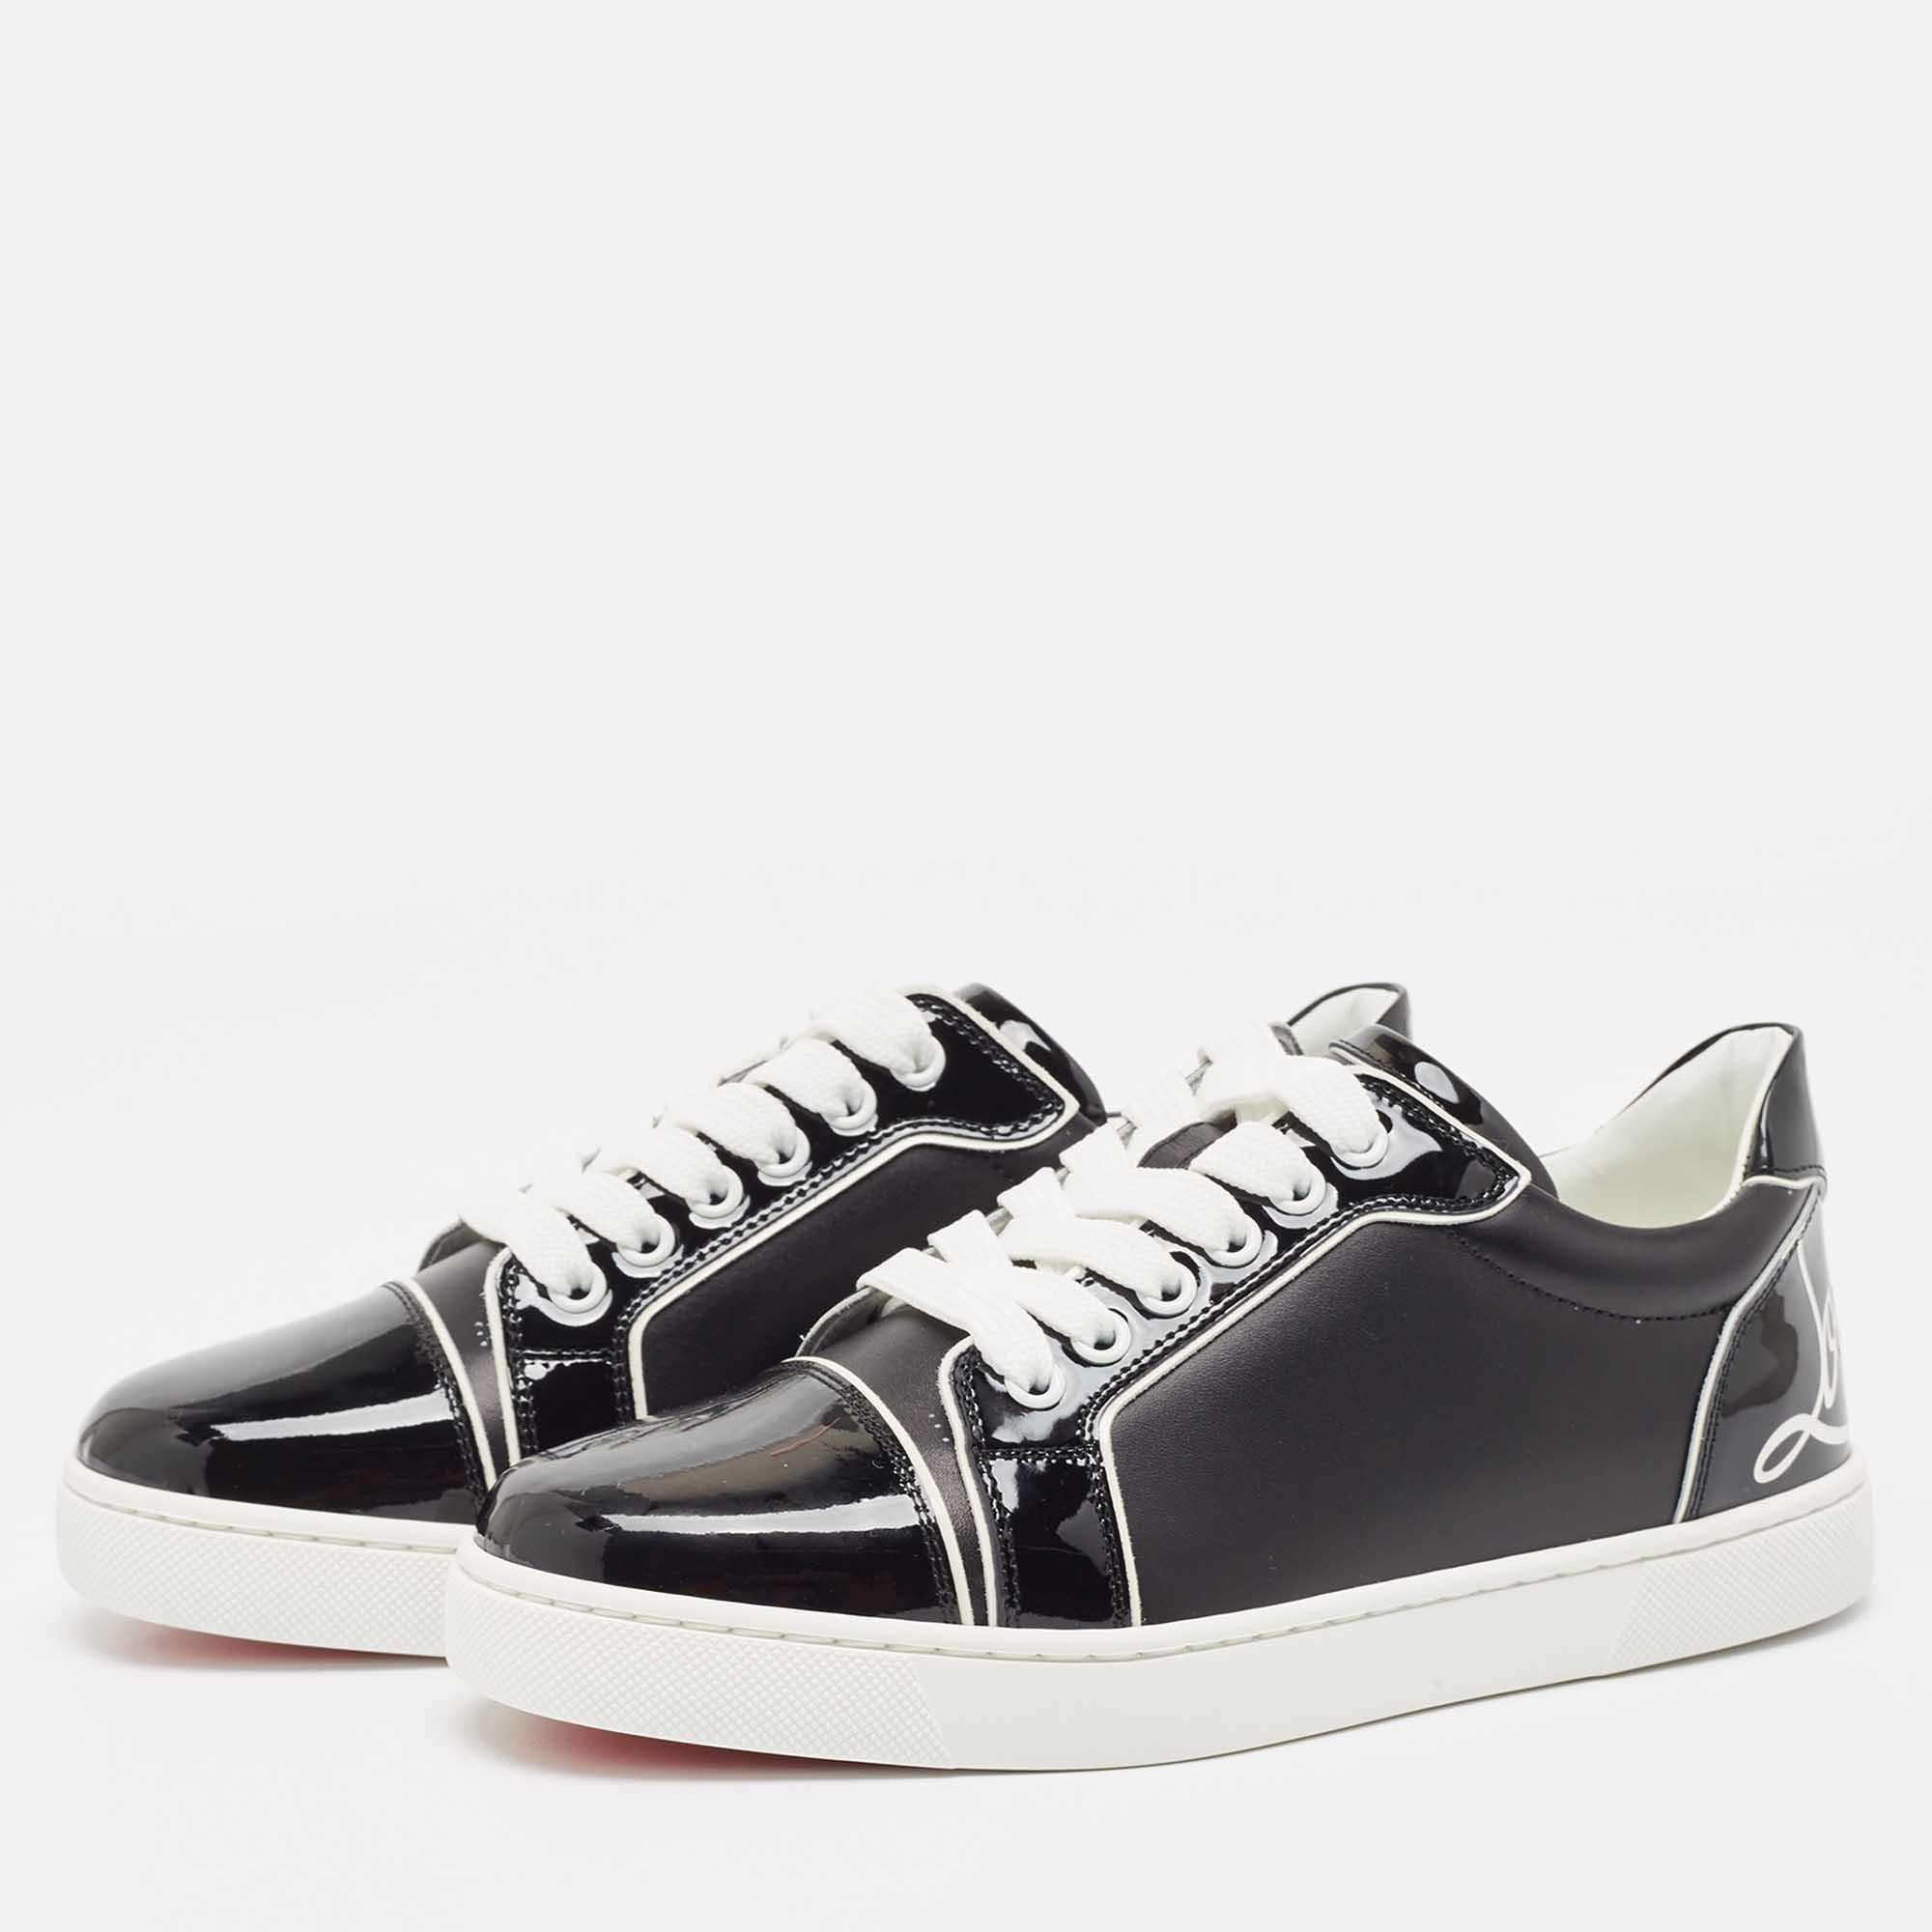 Christian Louboutin Black Patent and Leather Low Top Sneakers Size 36 For Sale 4